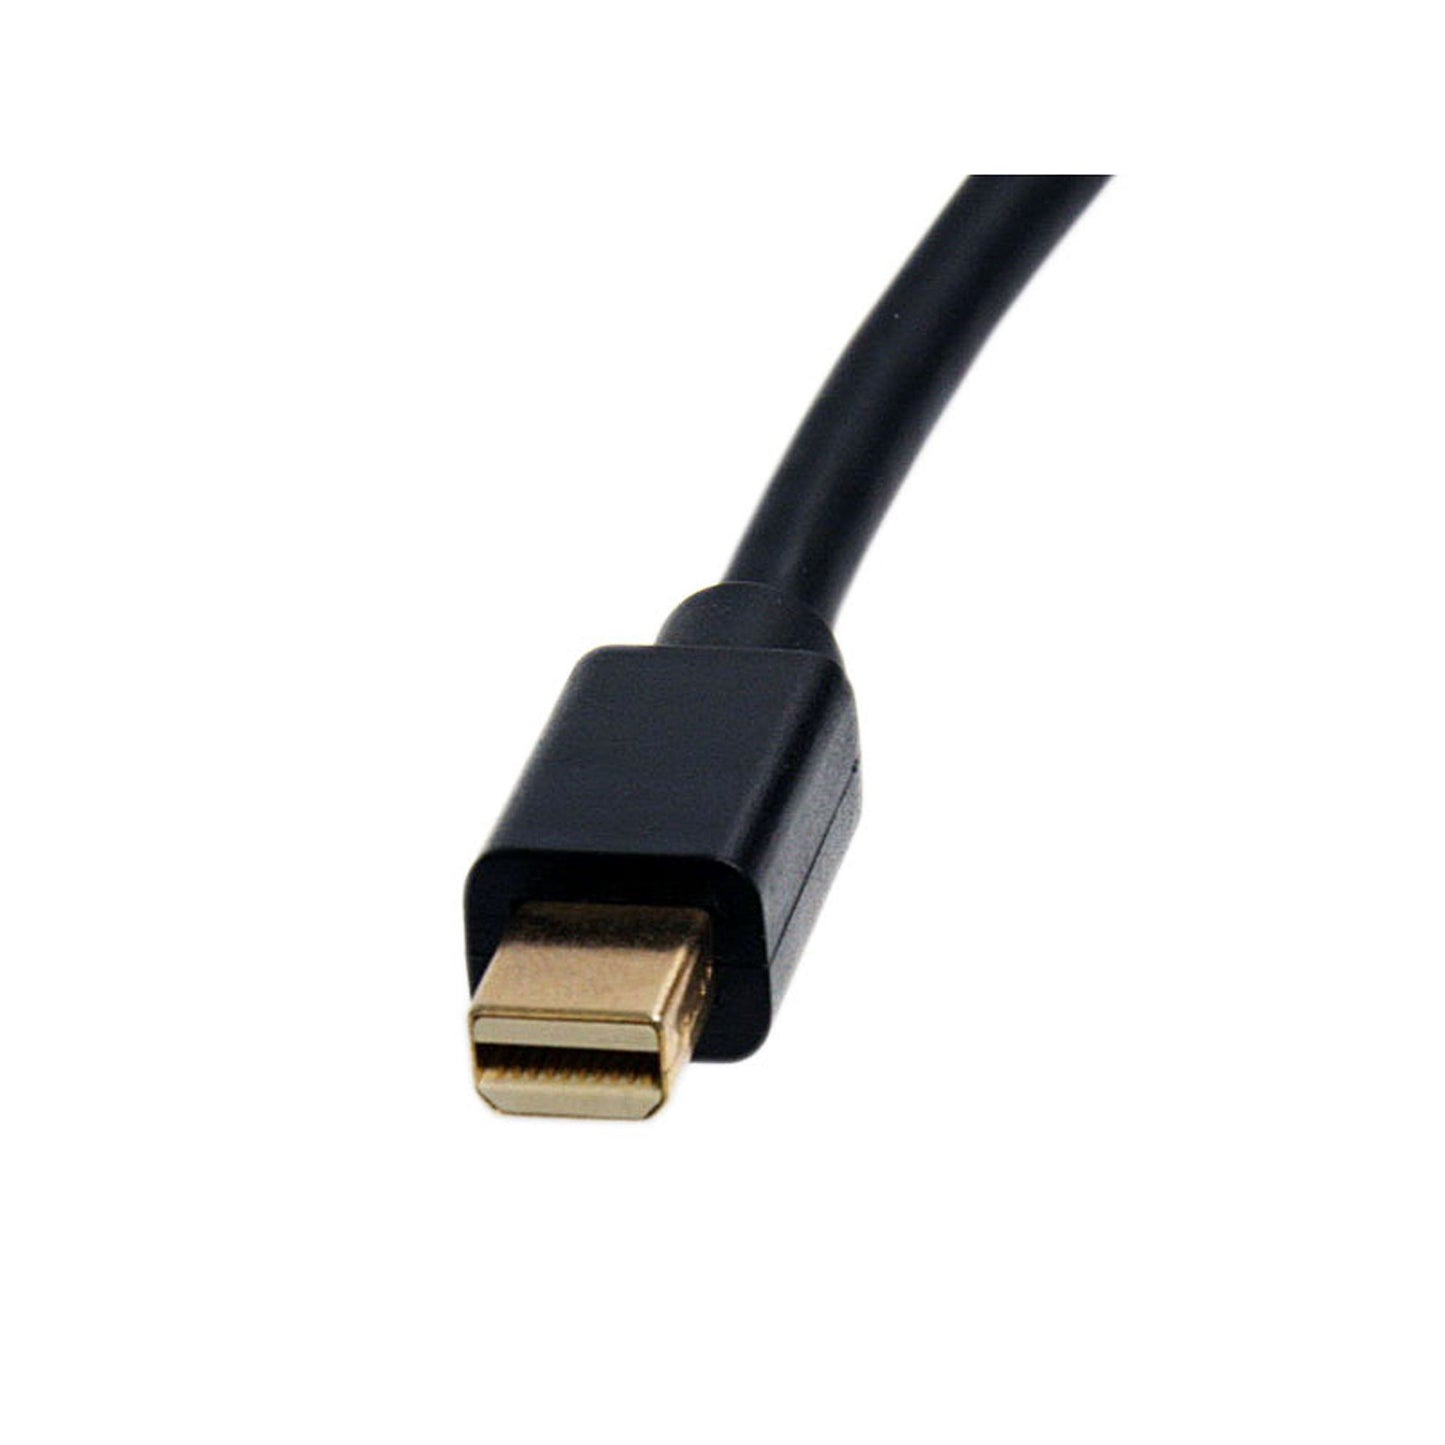 StarTech.com Mini DisplayPort to HDMI Adapter - mDP to HDMI Video Converter - 1080p - Mini DP or Thunderbolt 1/2 Mac/PC to HDMI Monitor/Display/TV - Passive mDP 1.2 to HDMI Adapter Dongle - Upgraded Version is MDP2HDEC-1